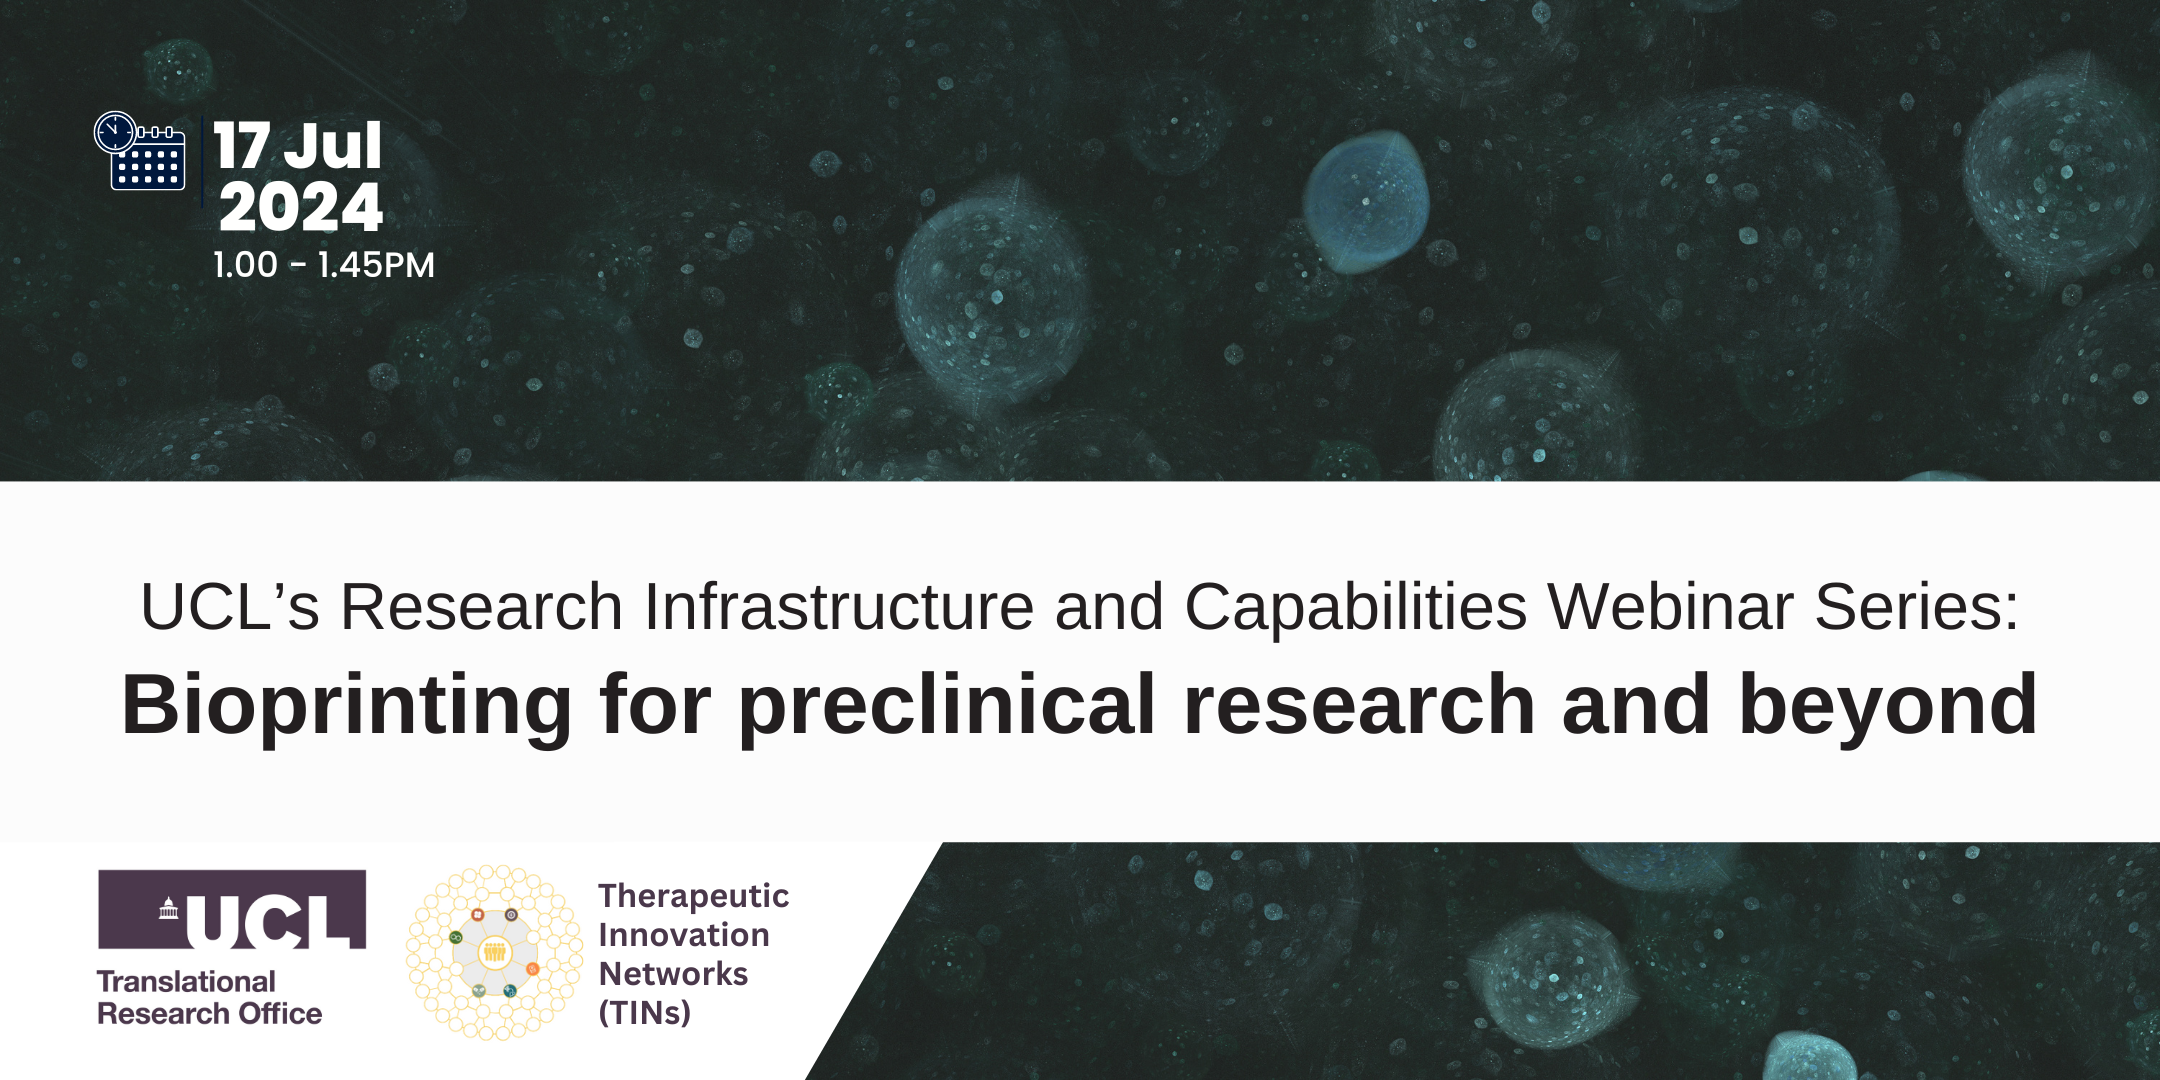 17 Jul 2024◾Webinar: Bioprinting for preclinical research and beyond